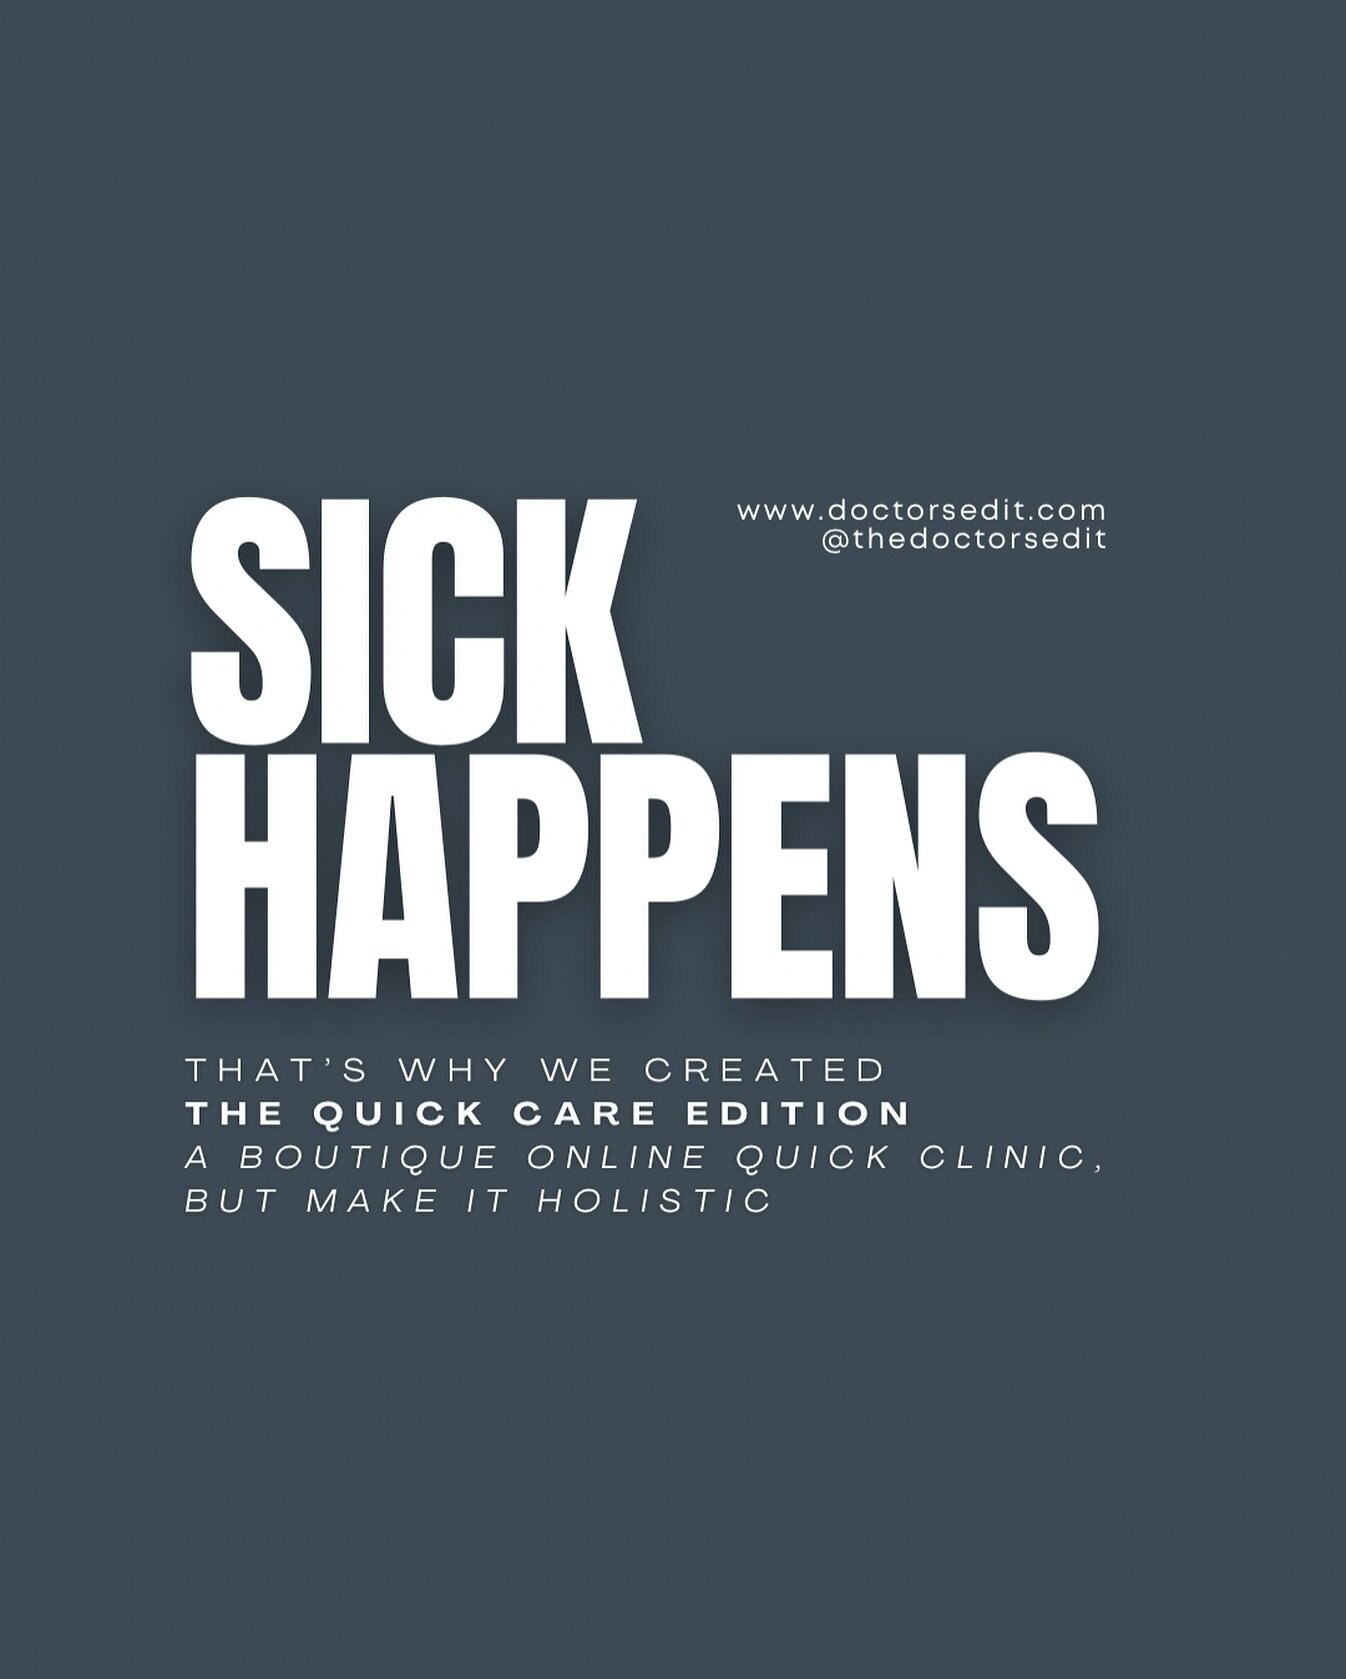 🤒 Sick Happens. We get it. 

🏥 You can go to a busy big box retail clinic or an online prescription pill mill and get what you pay for. 

👩&zwj;💻 Or, get an online visit with a real, board certified MD who takes a holistic approach while still pr